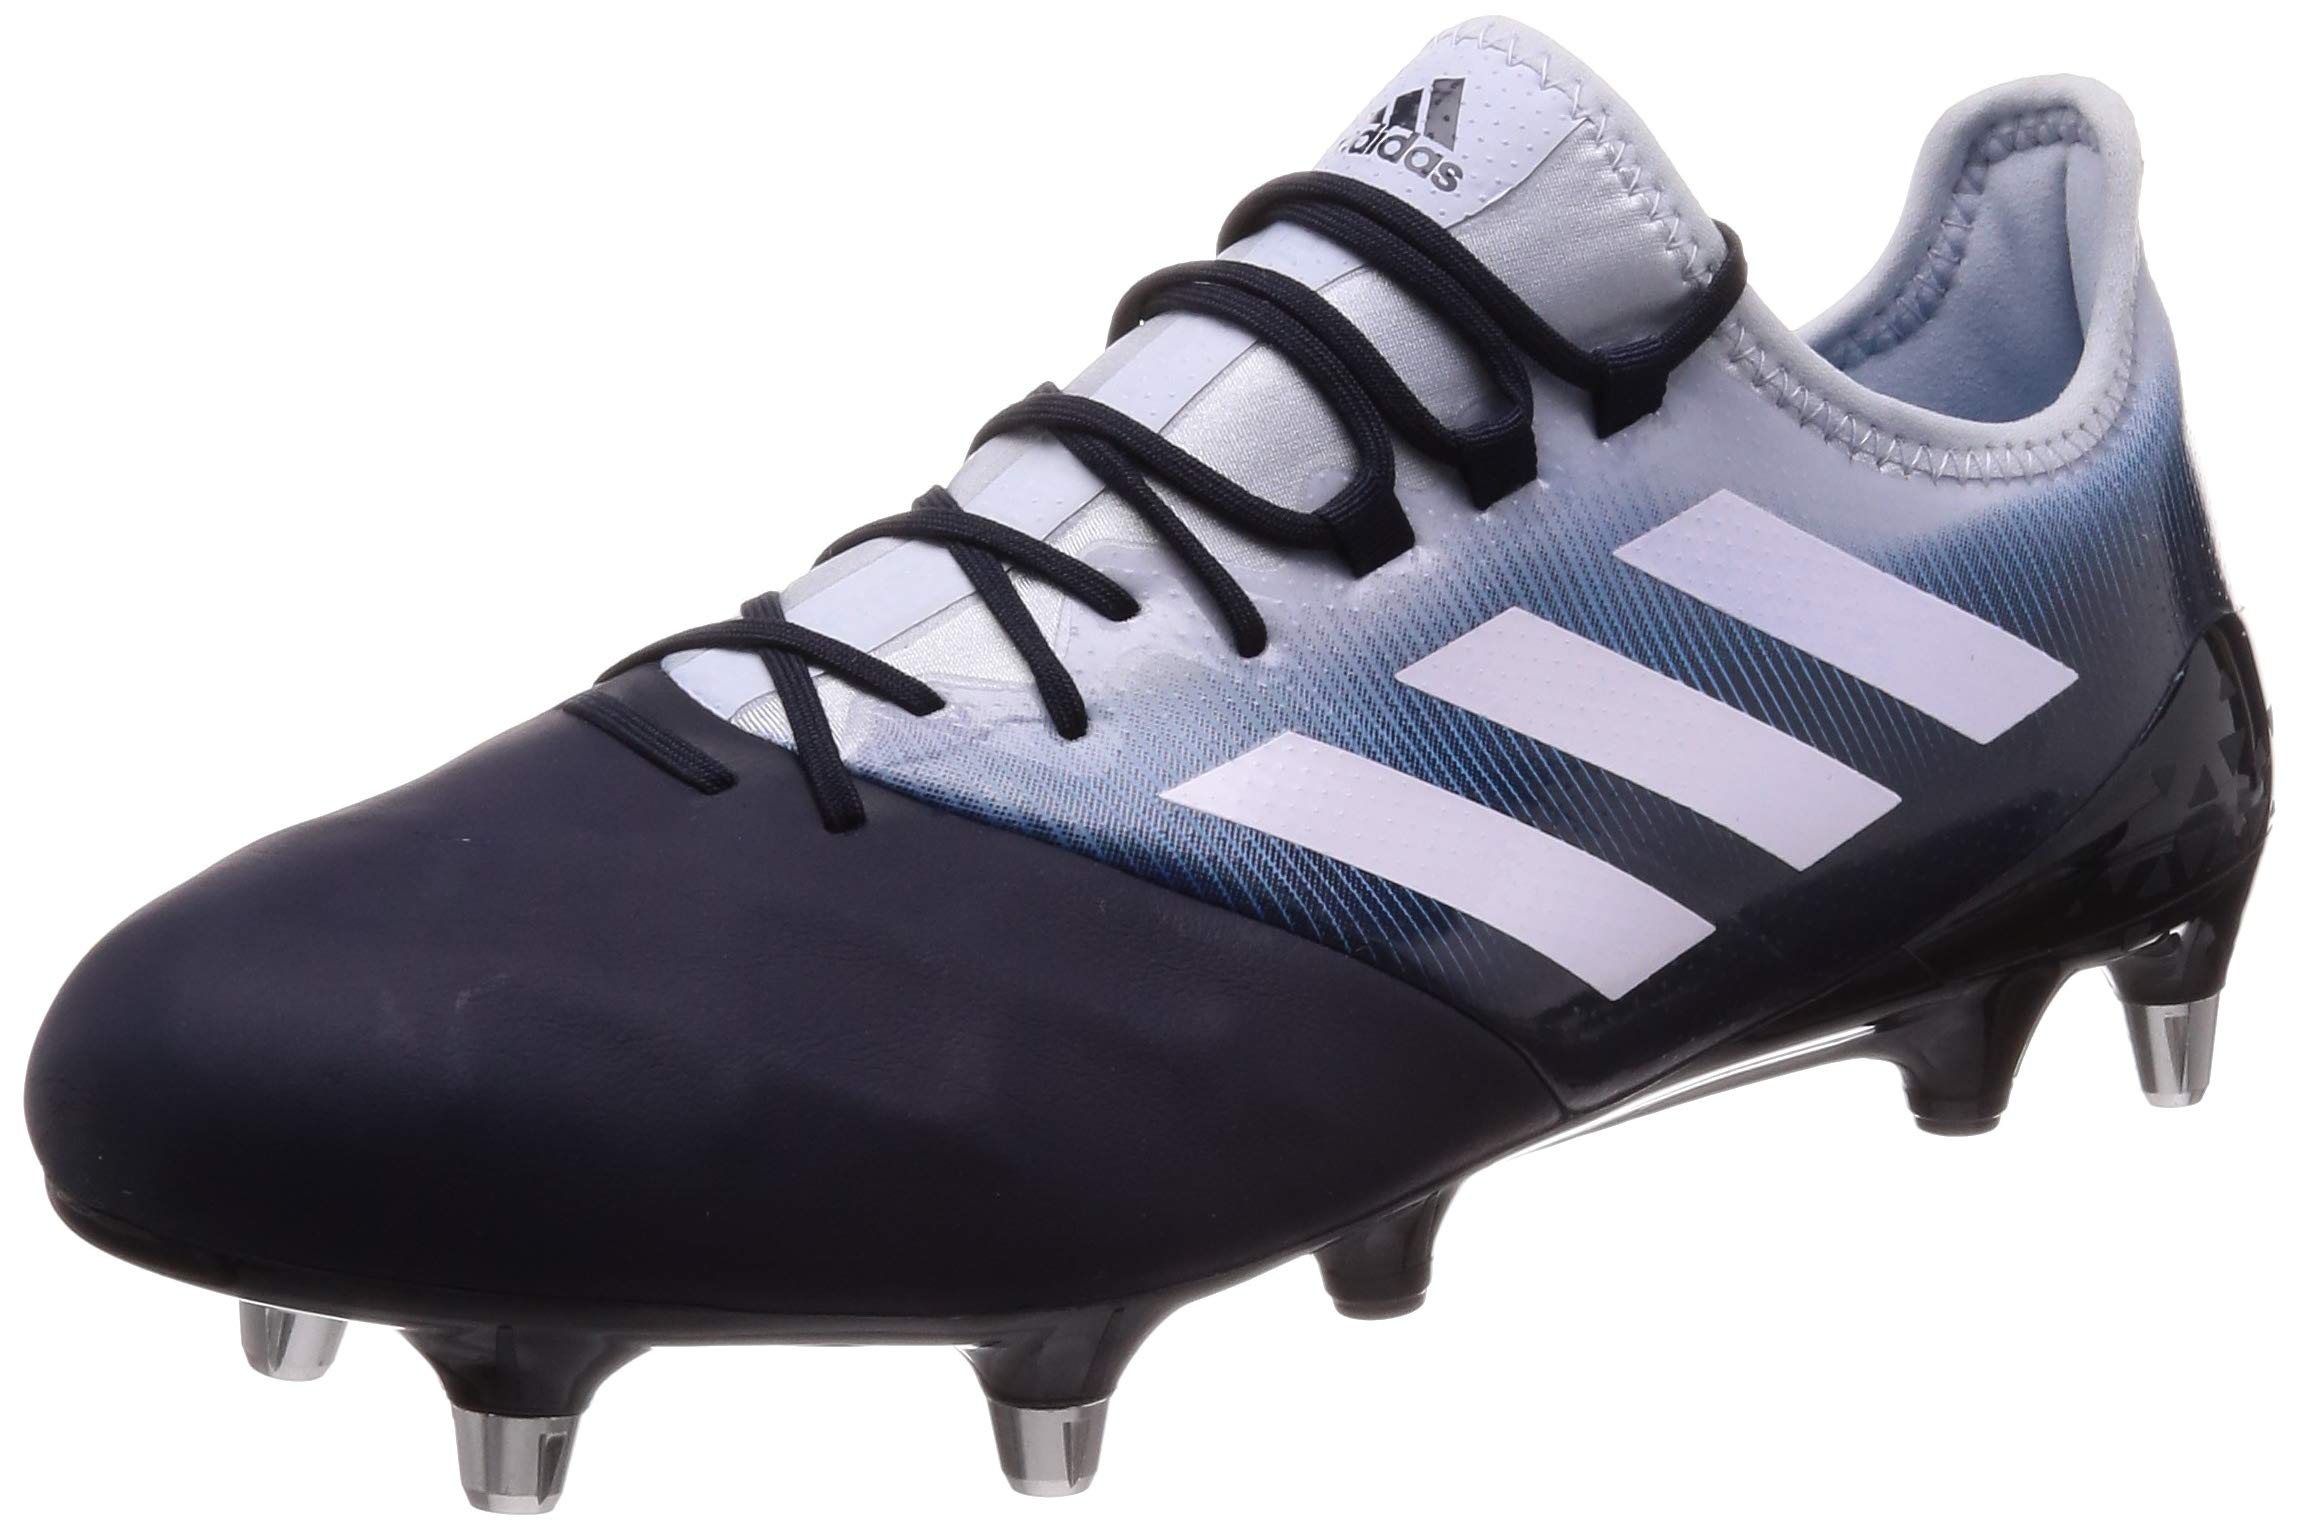 adidas Light SG Rugby Boots, Blue US 9.5